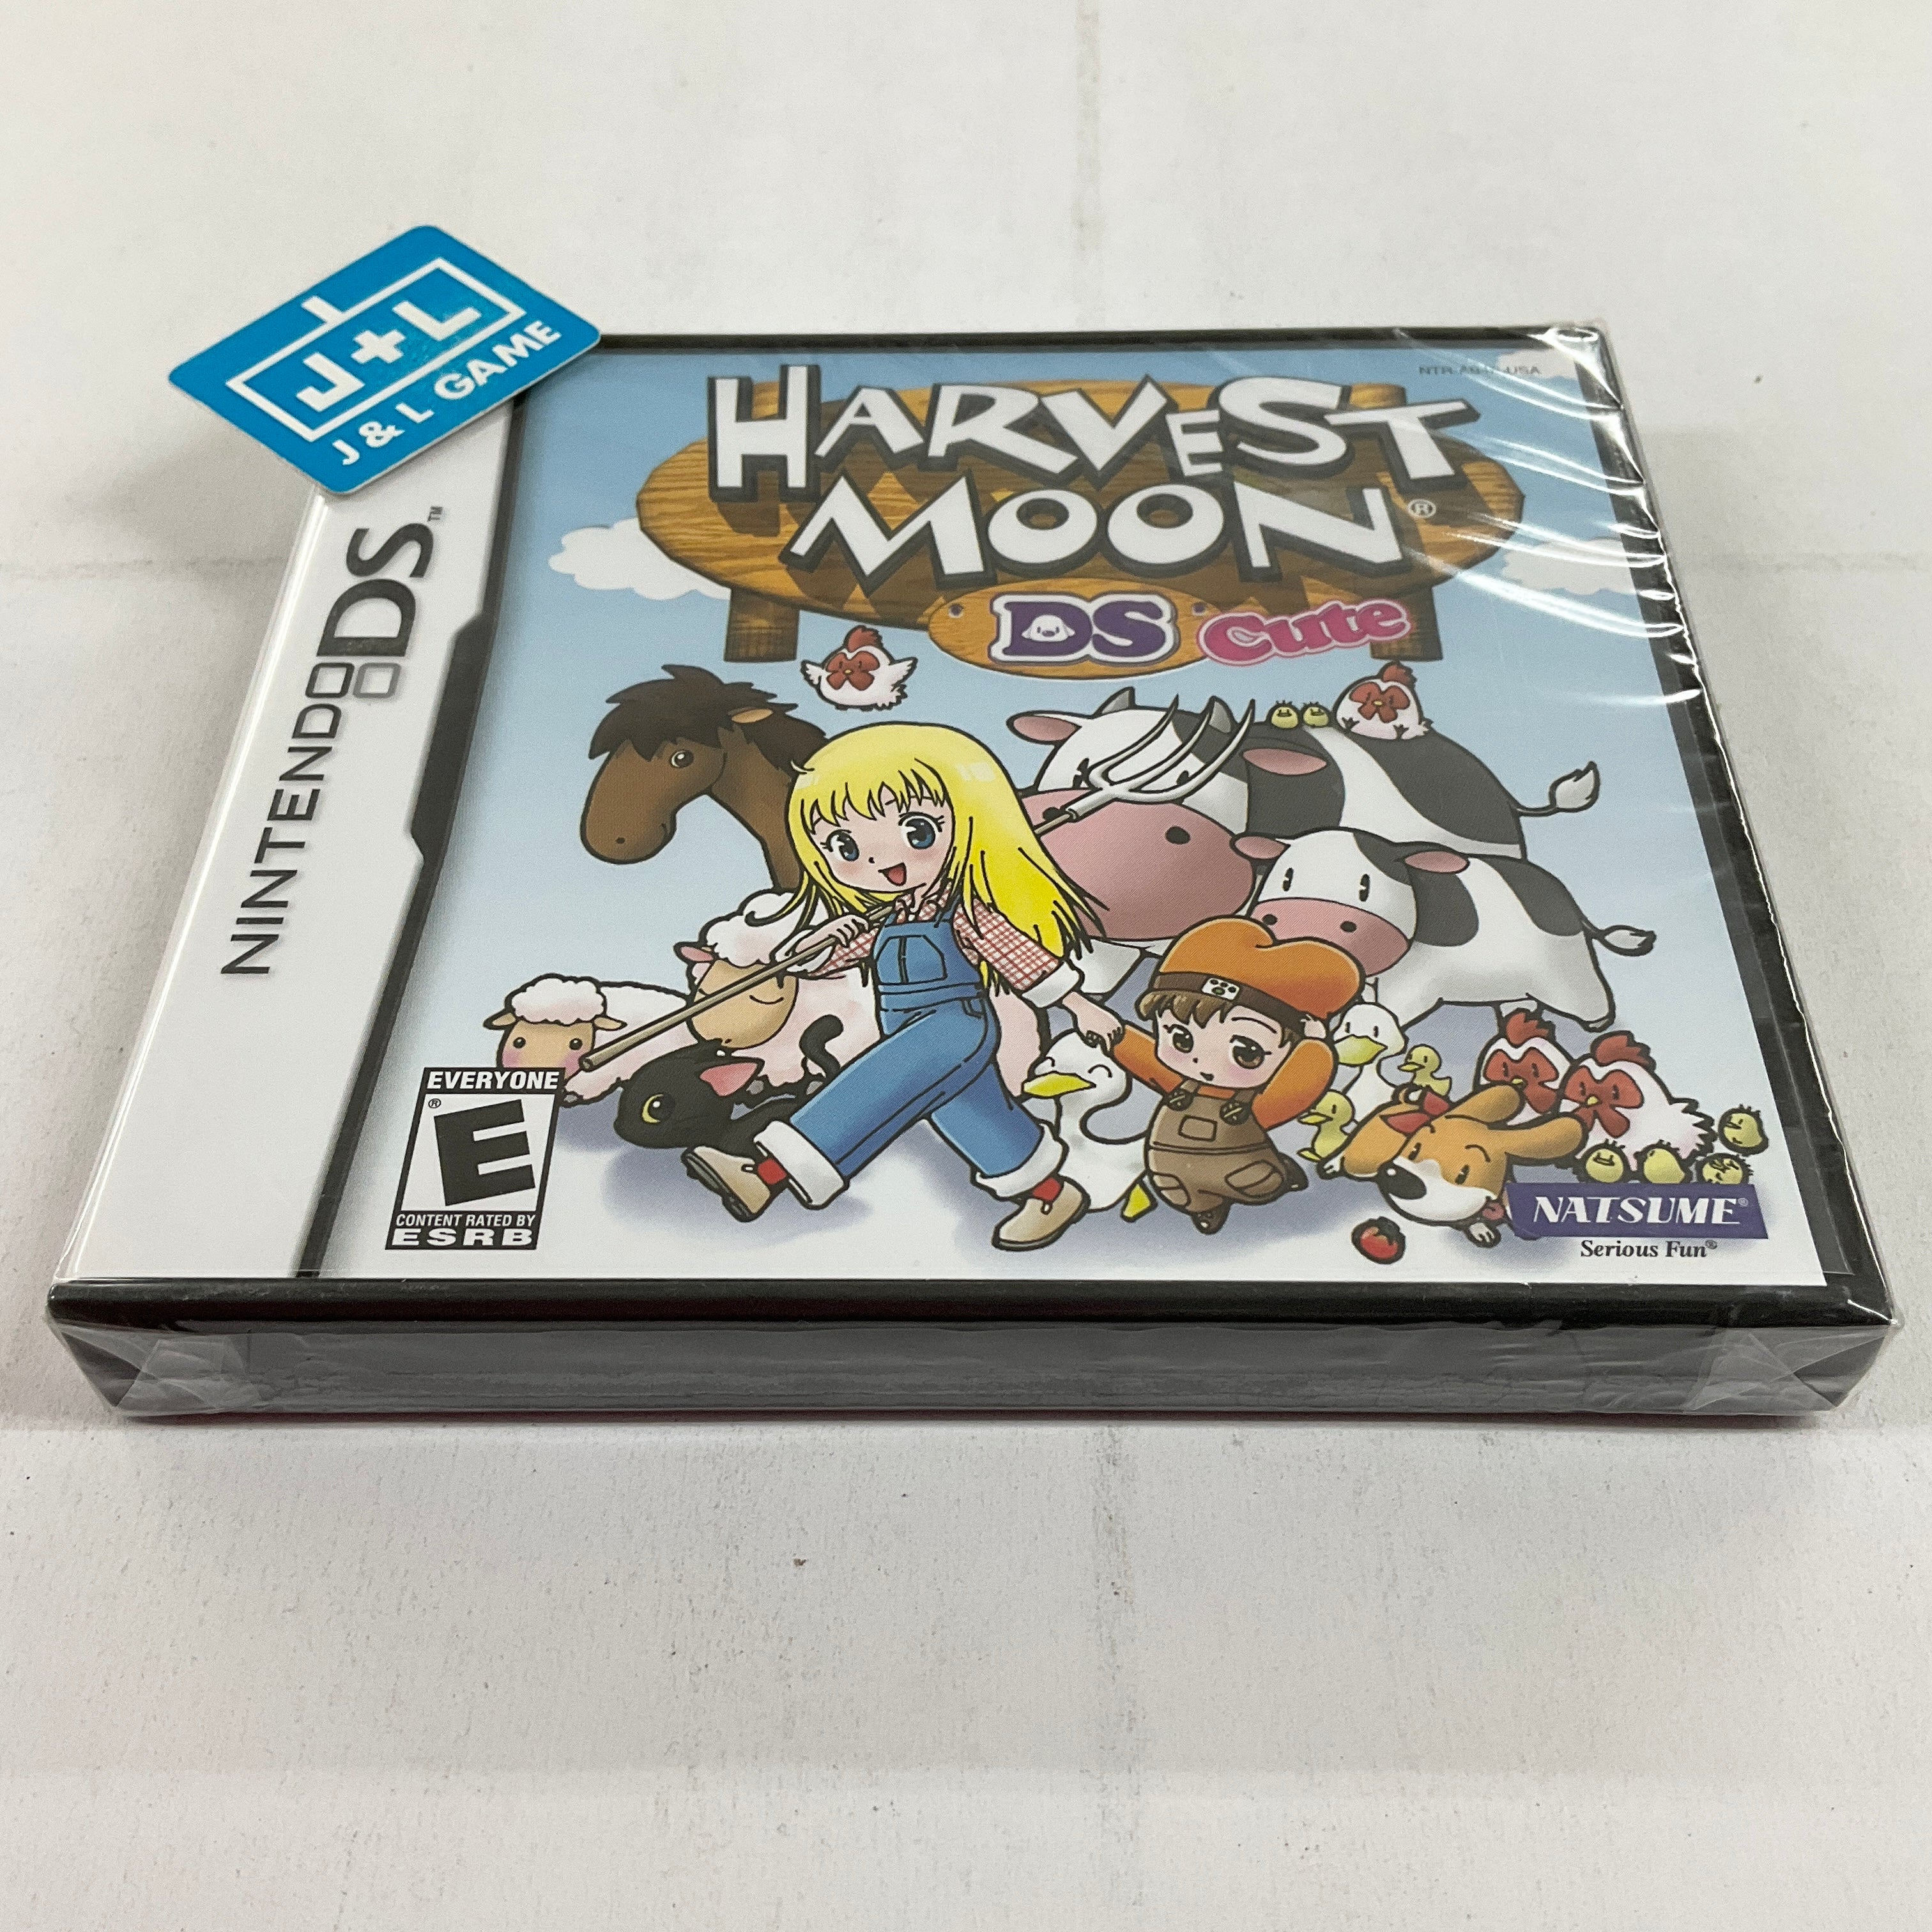 Harvest Moon DS Cute - (NDS) Nintendo DS Video Games Natsume   